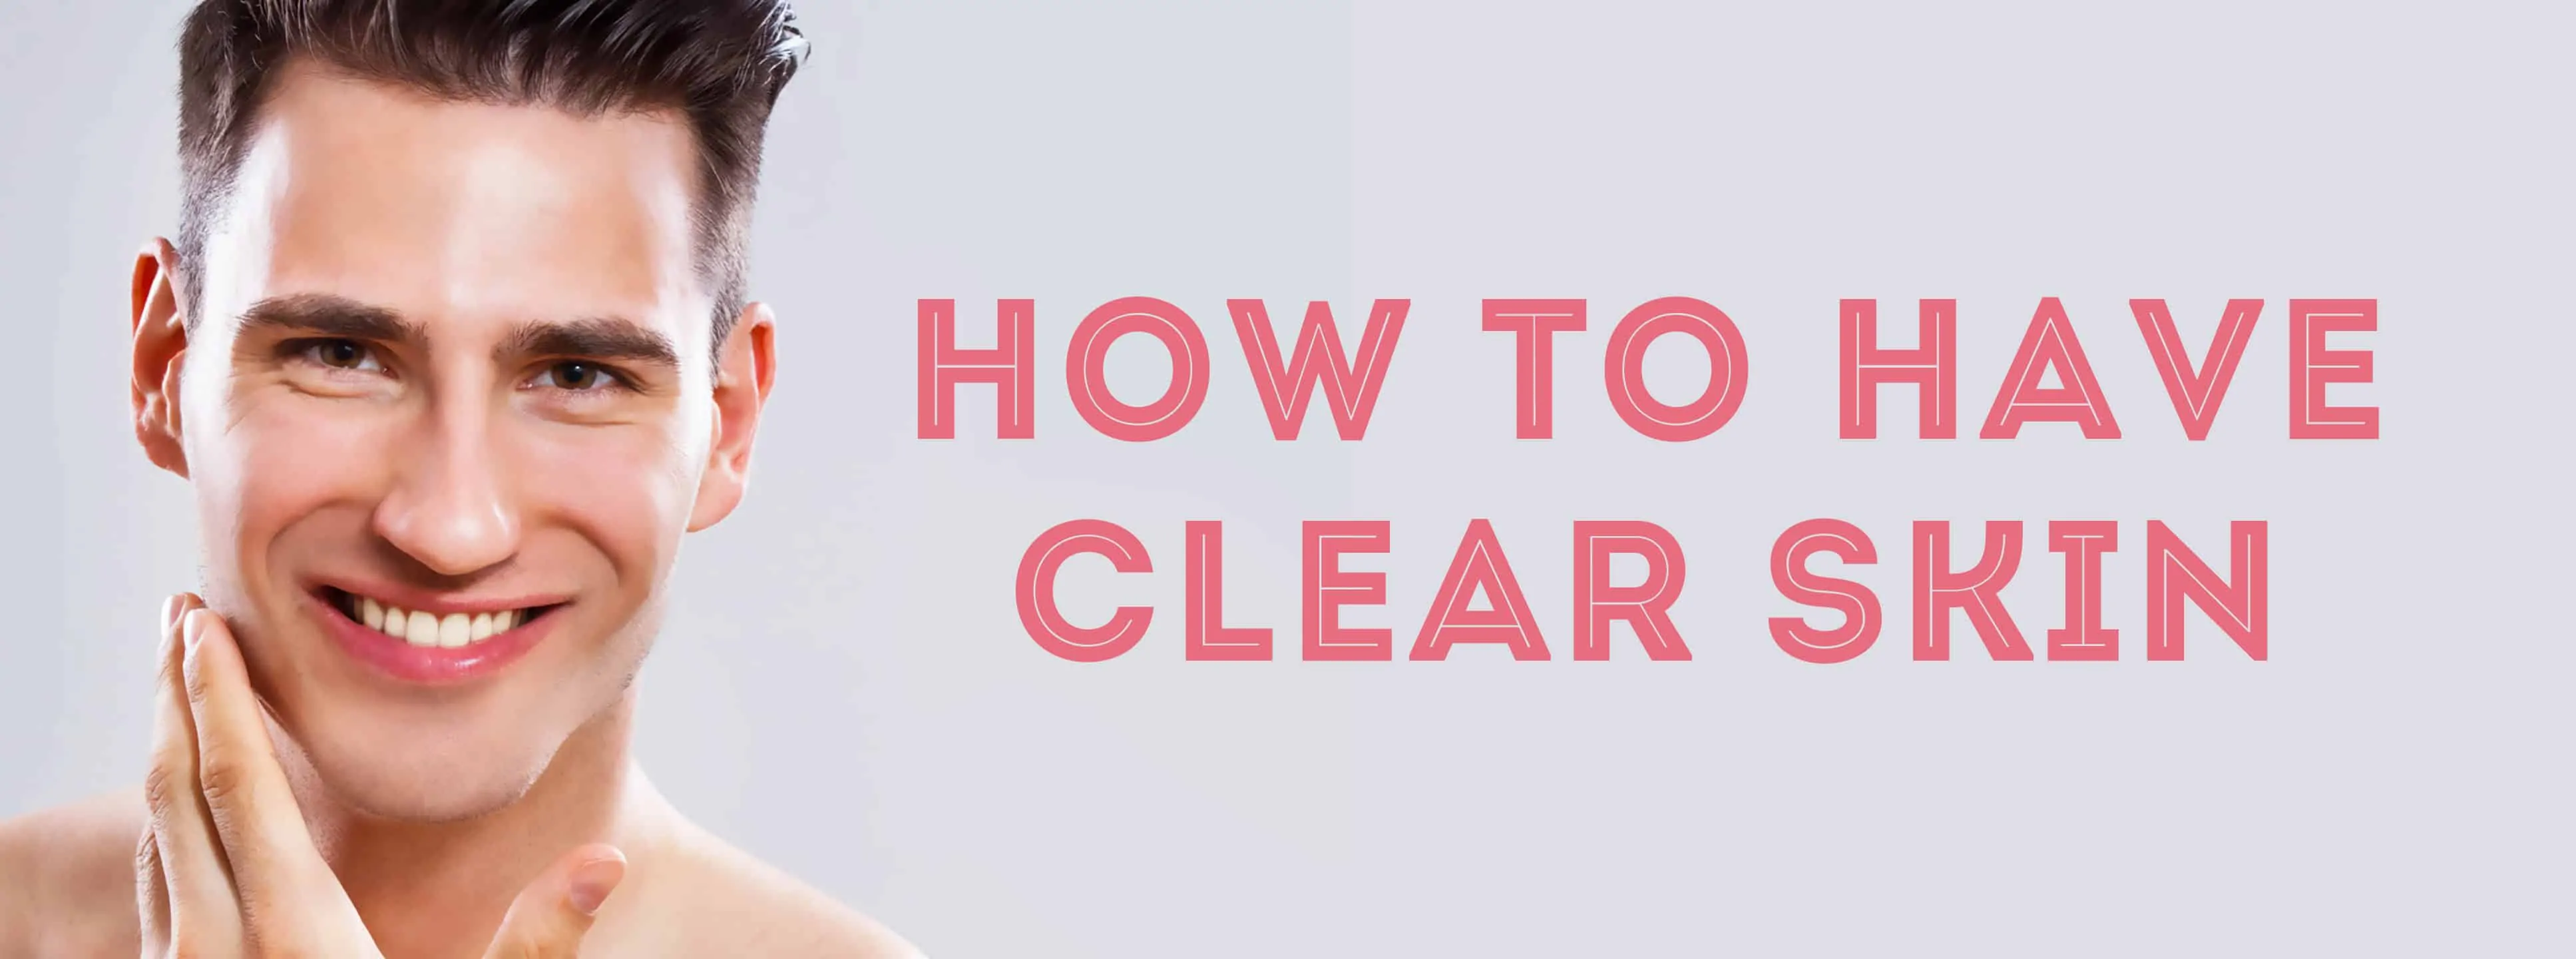 how to have clear skin